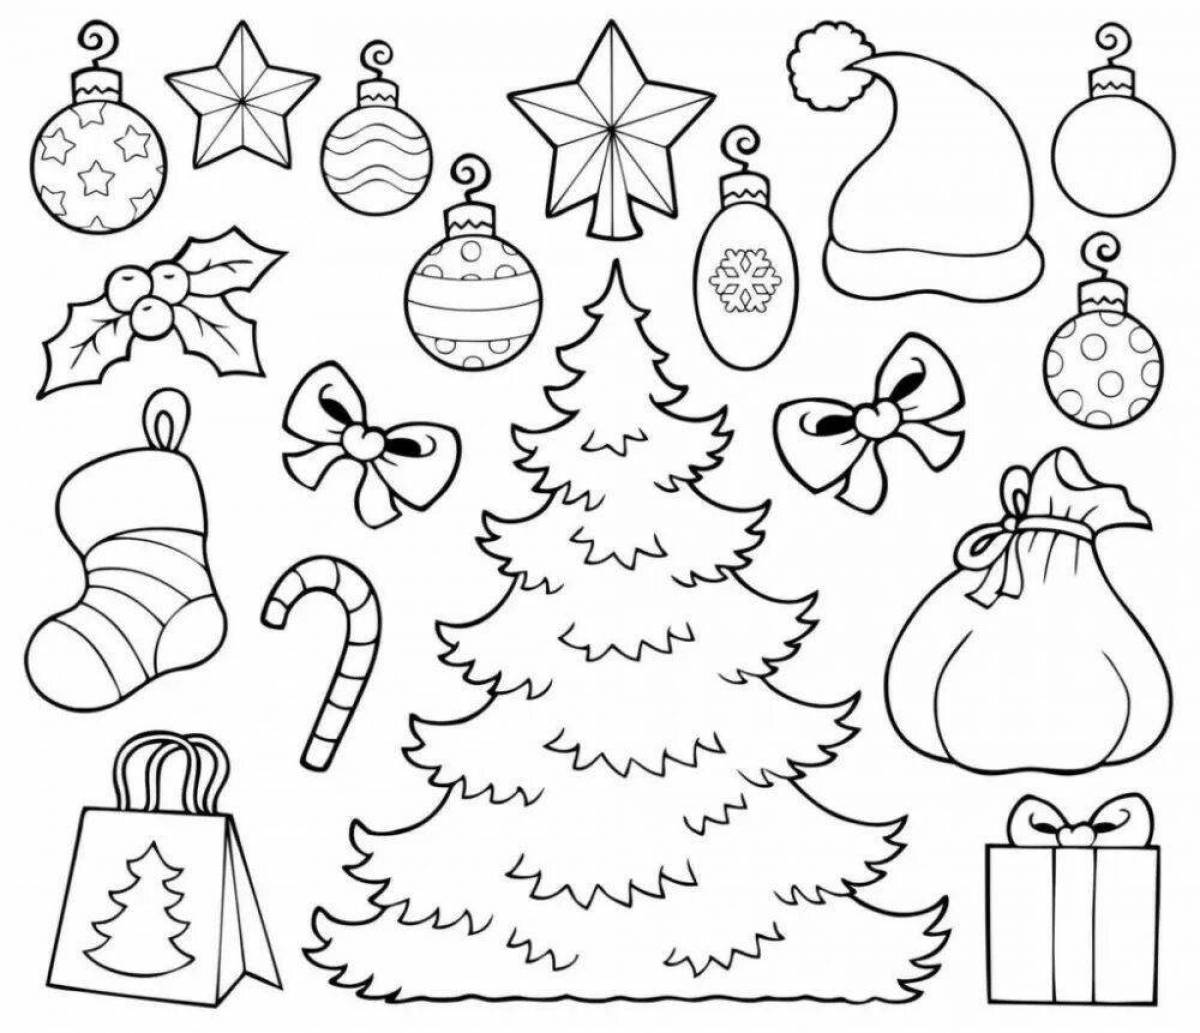 Colorful Christmas stickers coloring pages